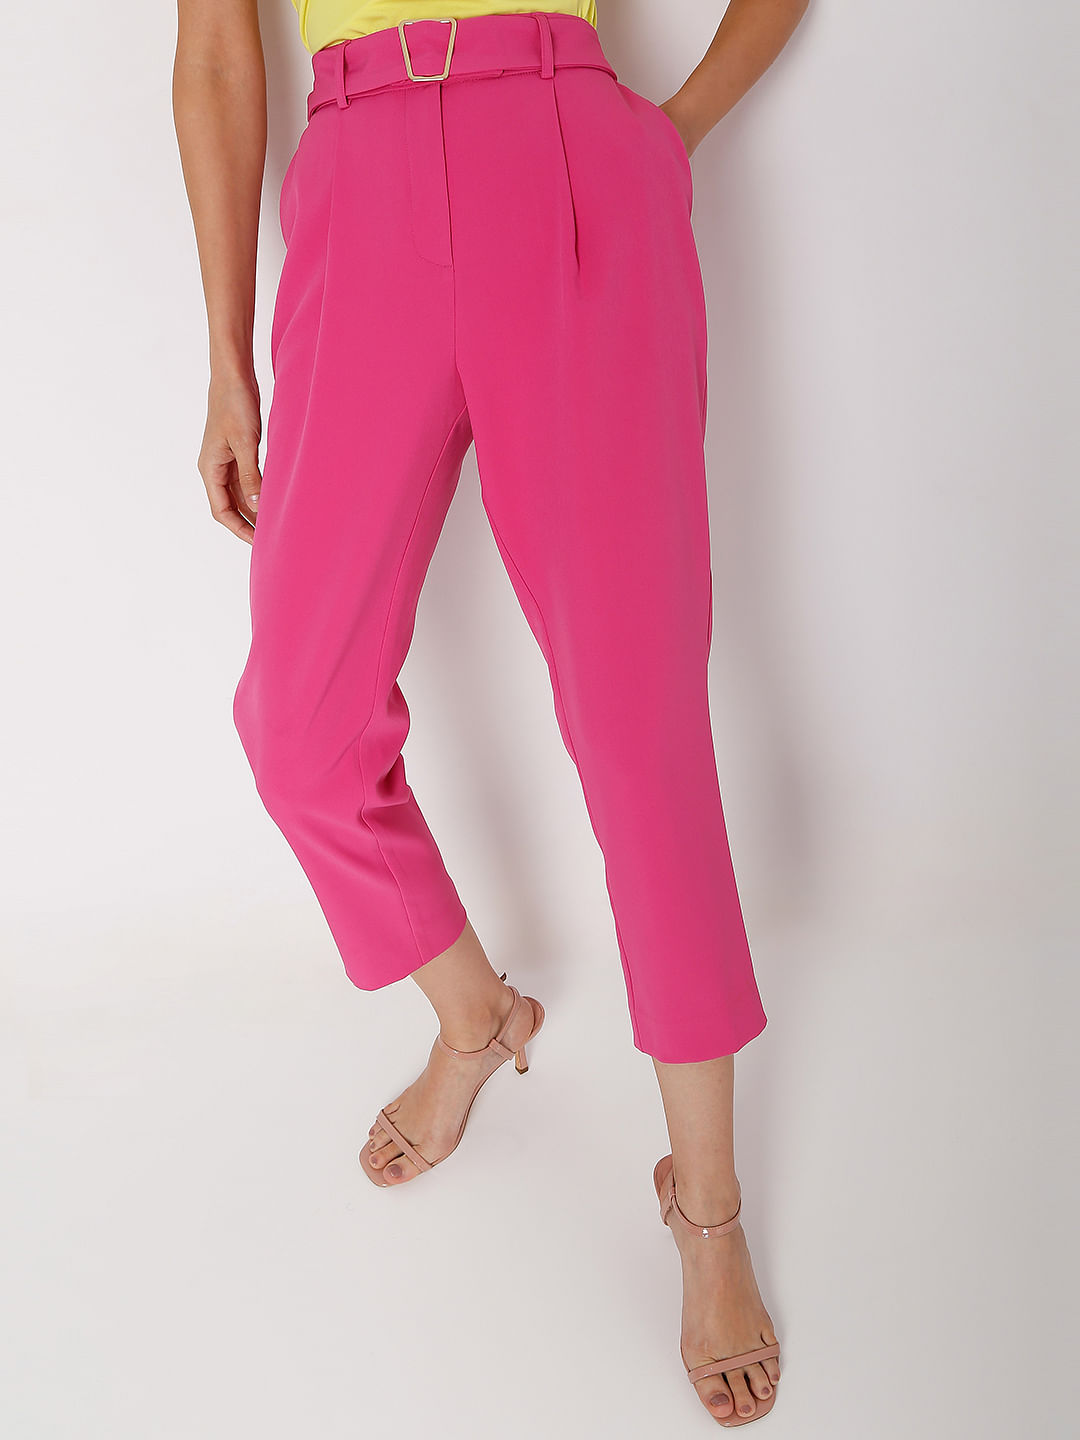 Magre Trousers and Pants  Buy Magre Fuschia Pink Papper Bag Pants Online   Nykaa Fashion